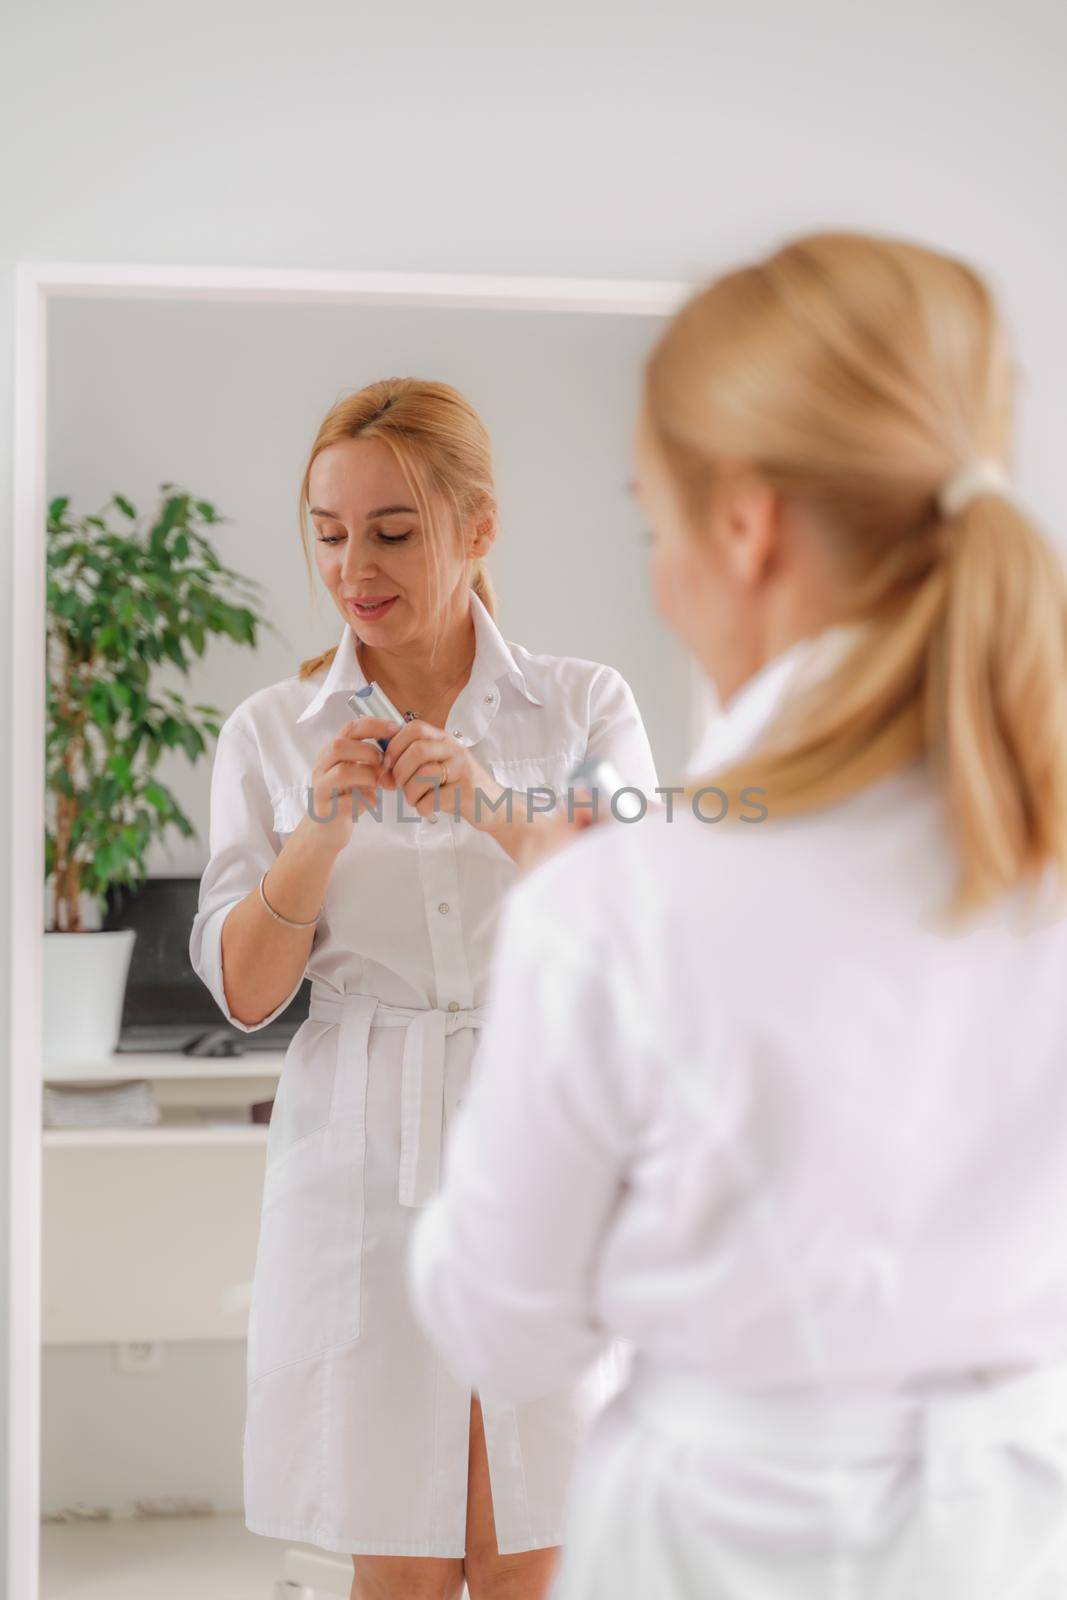 A blonde woman in white formal clothes looks at herself in the mirror. On a white background, green leaves at the back. by Matiunina